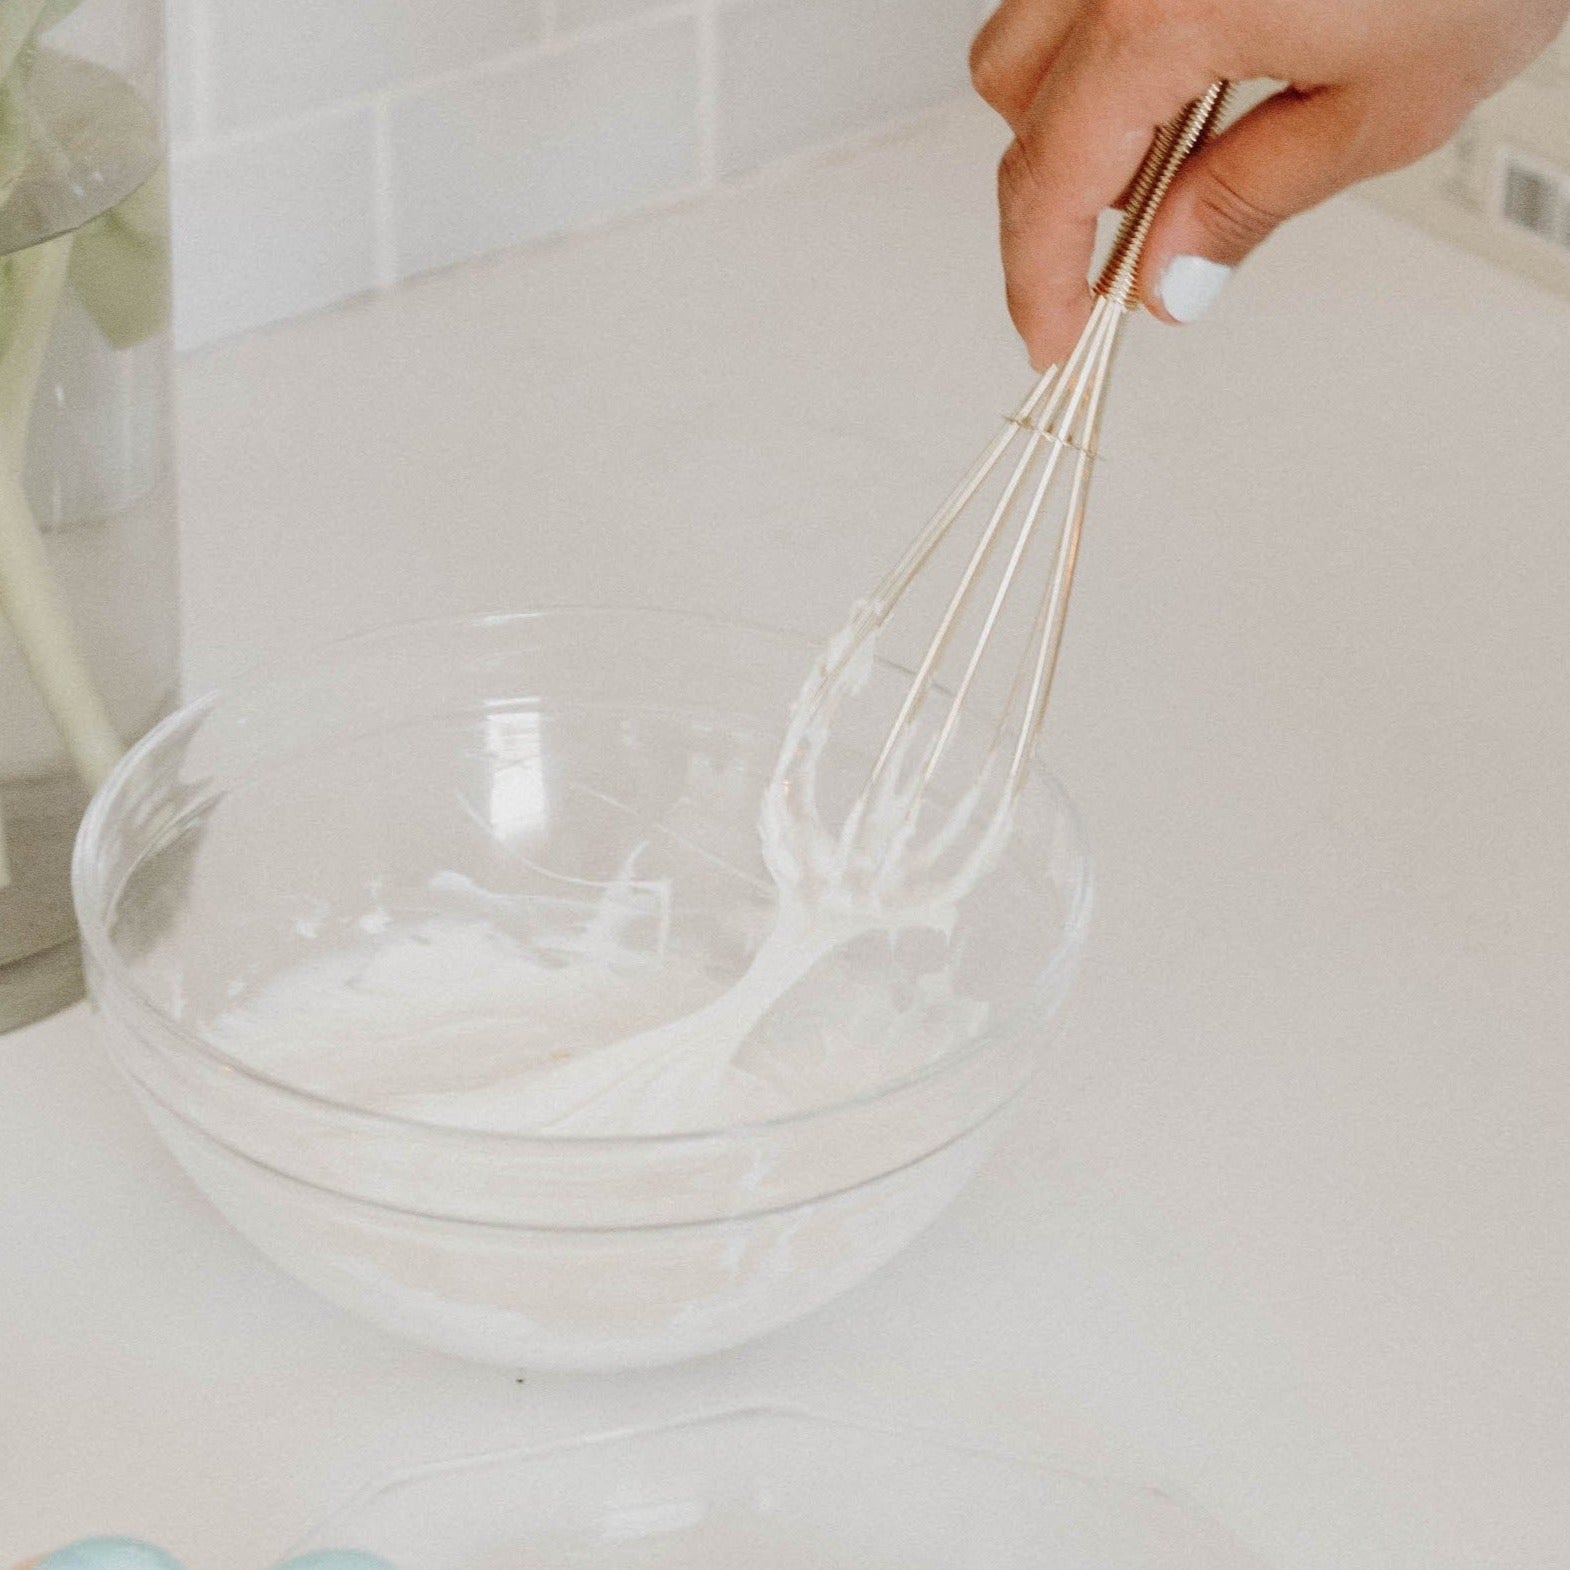 Gold whisk mixing frosting in a glass bowl